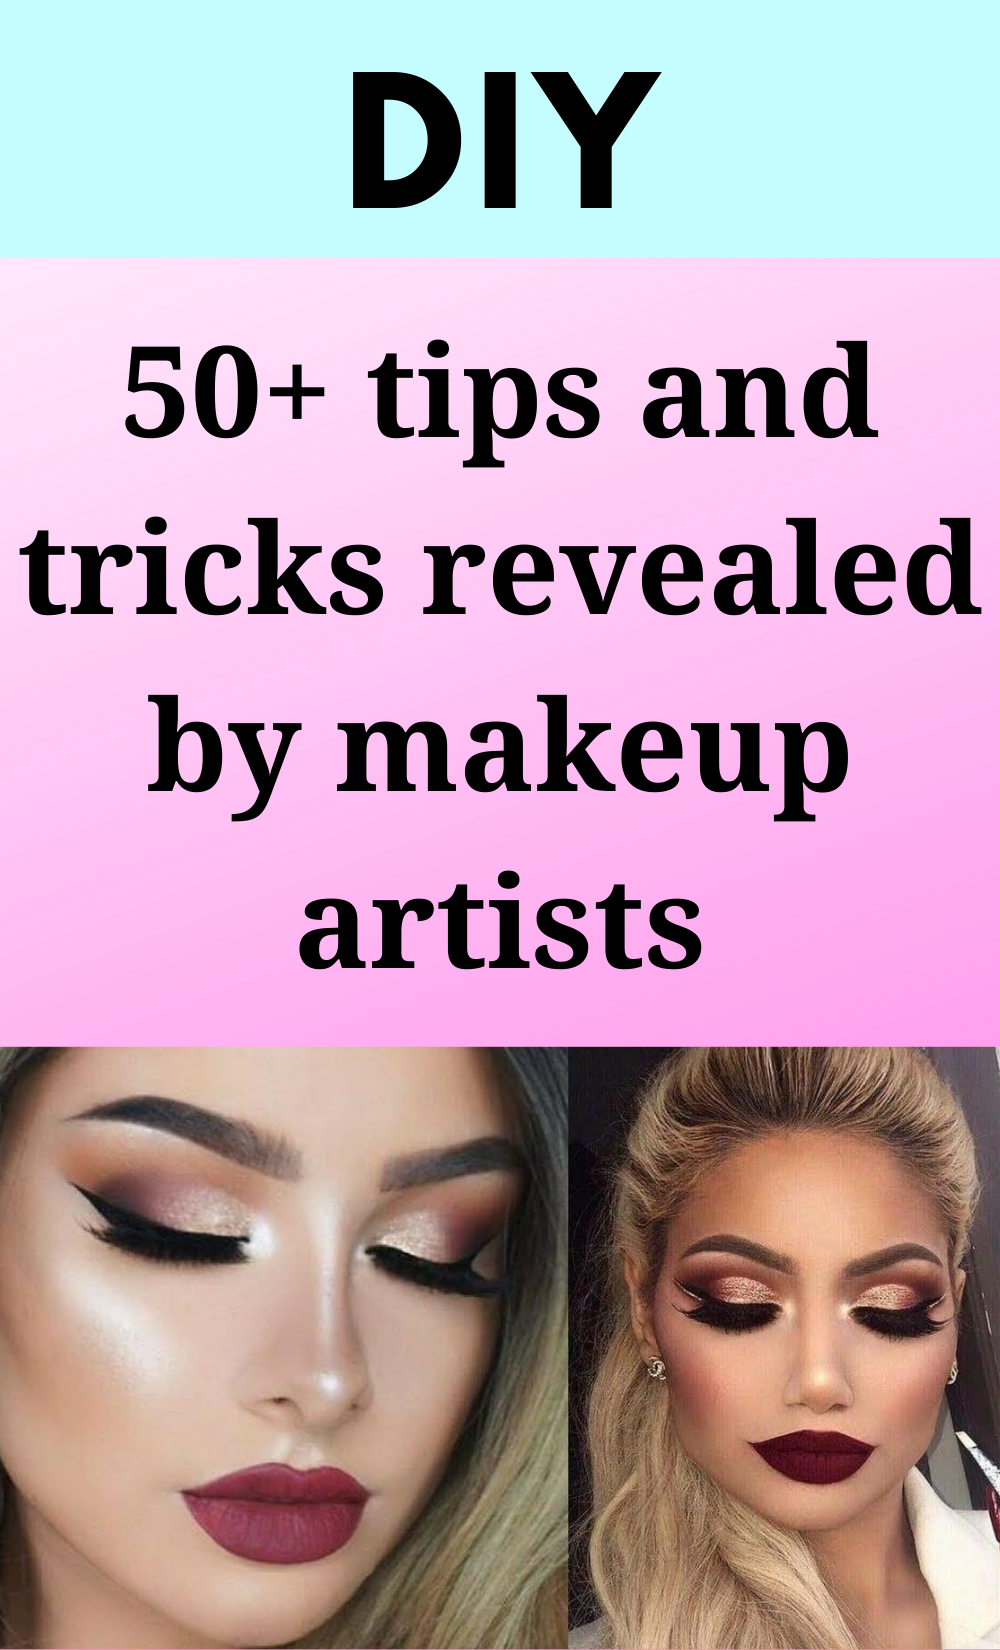 50+ tips and tricks revealed by makeup artists -   15 beauty Makeup hacks ideas